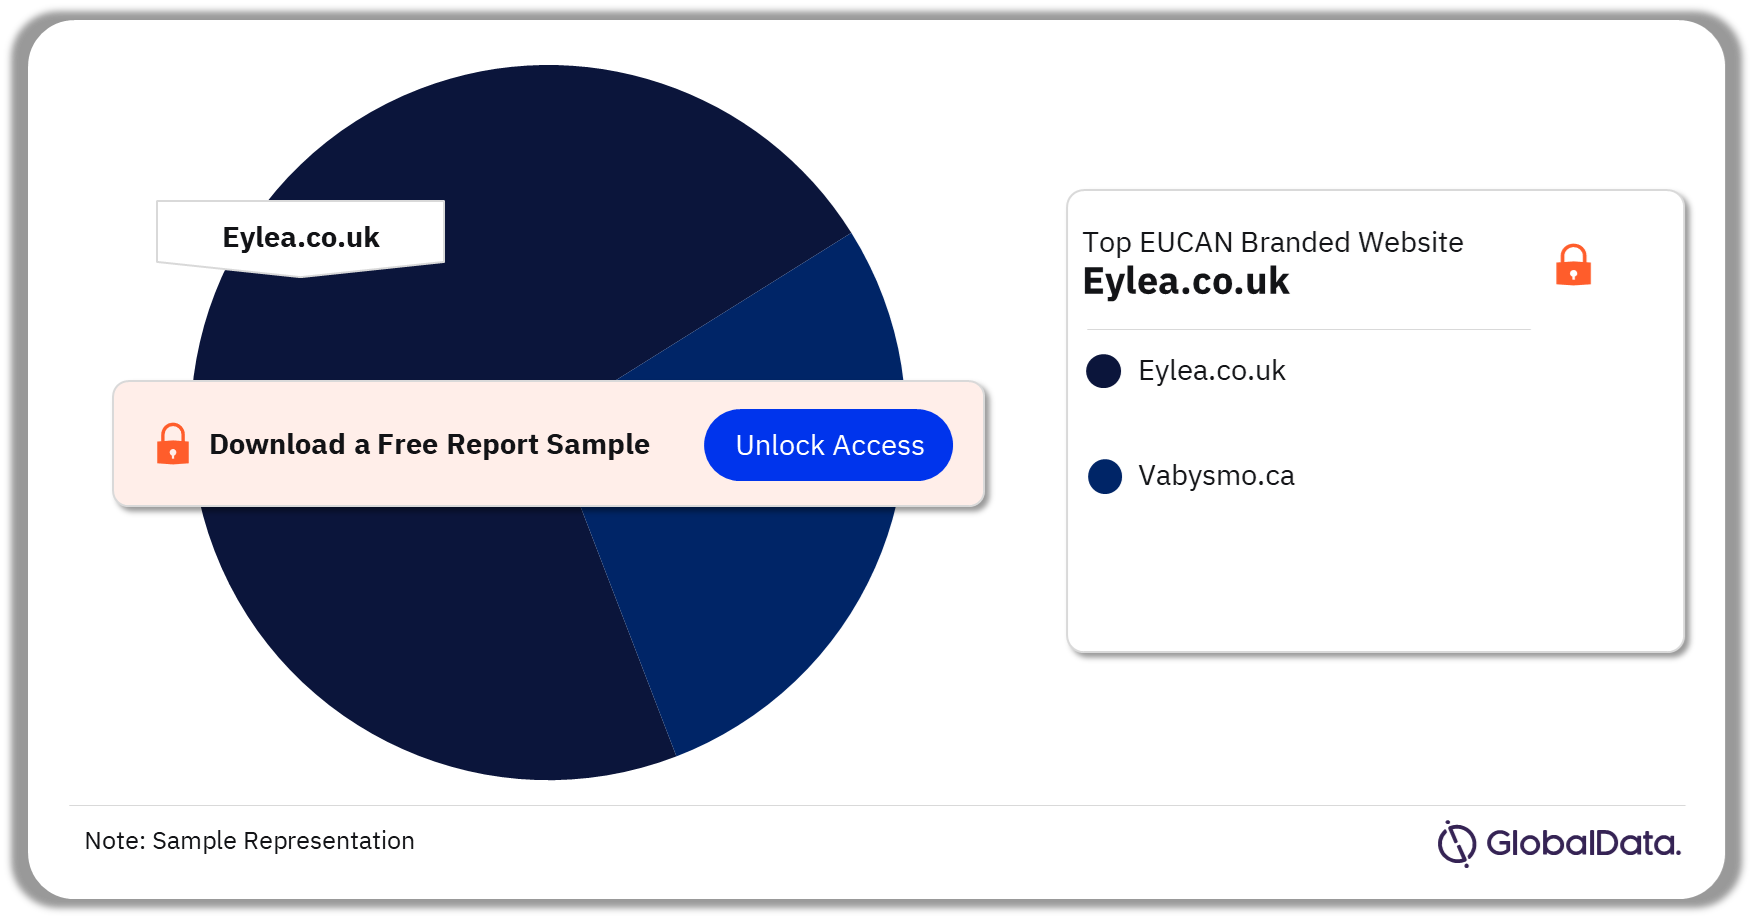 Traffic Share to Branded EUCAN AMD Sites, May 2022 – April 2023 (%)